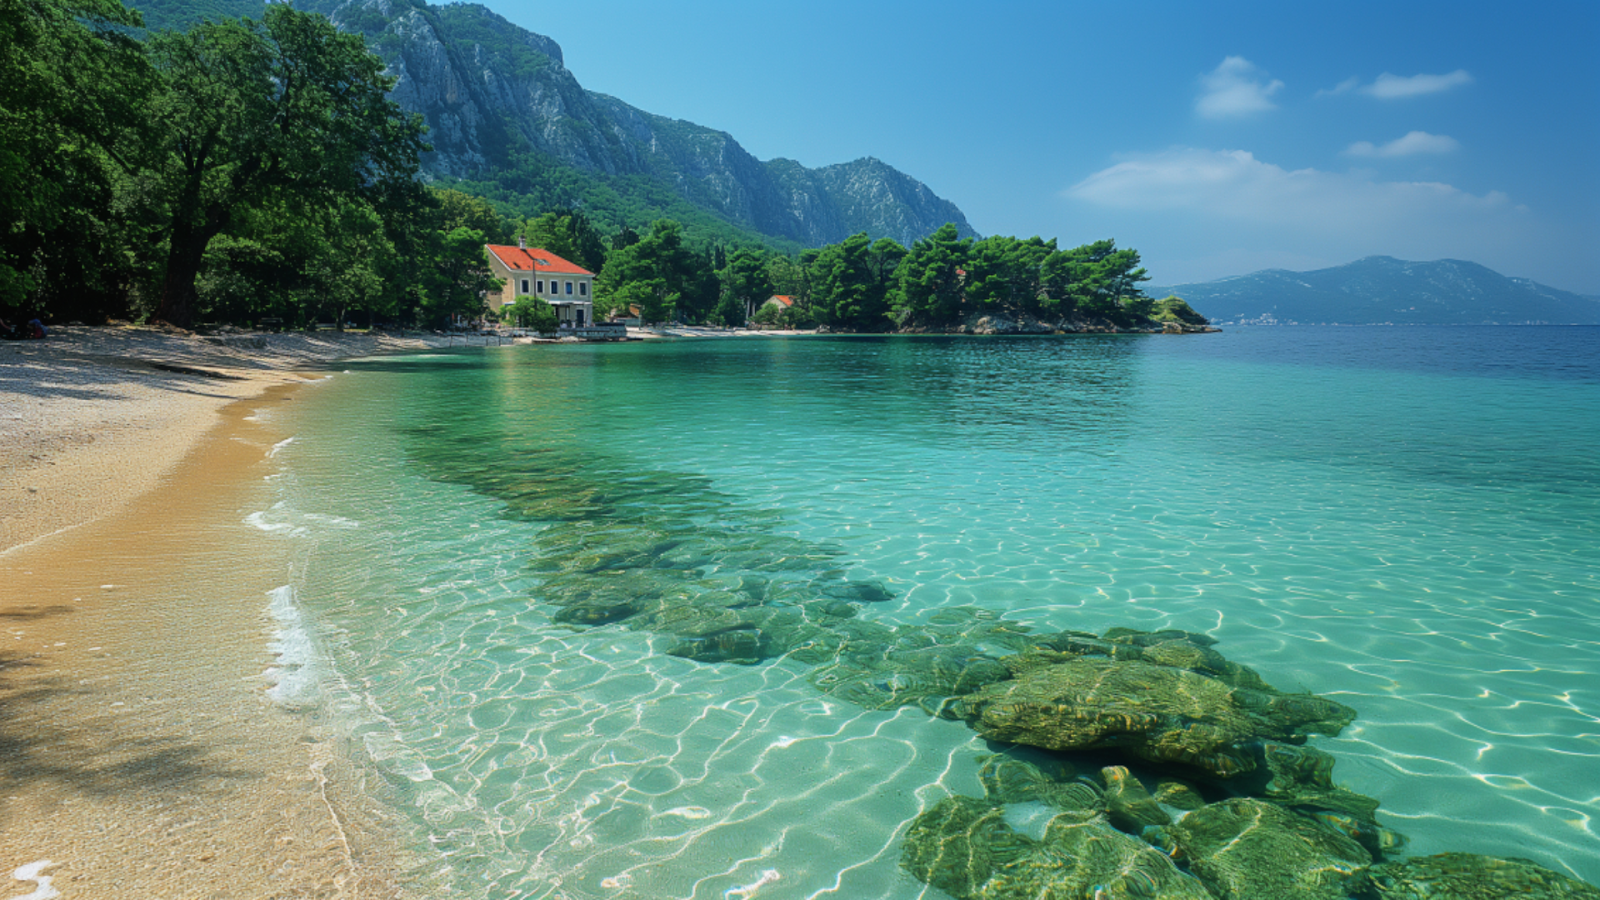 Secluded beach with crystal-clear waters and lush greenery in Croatia.